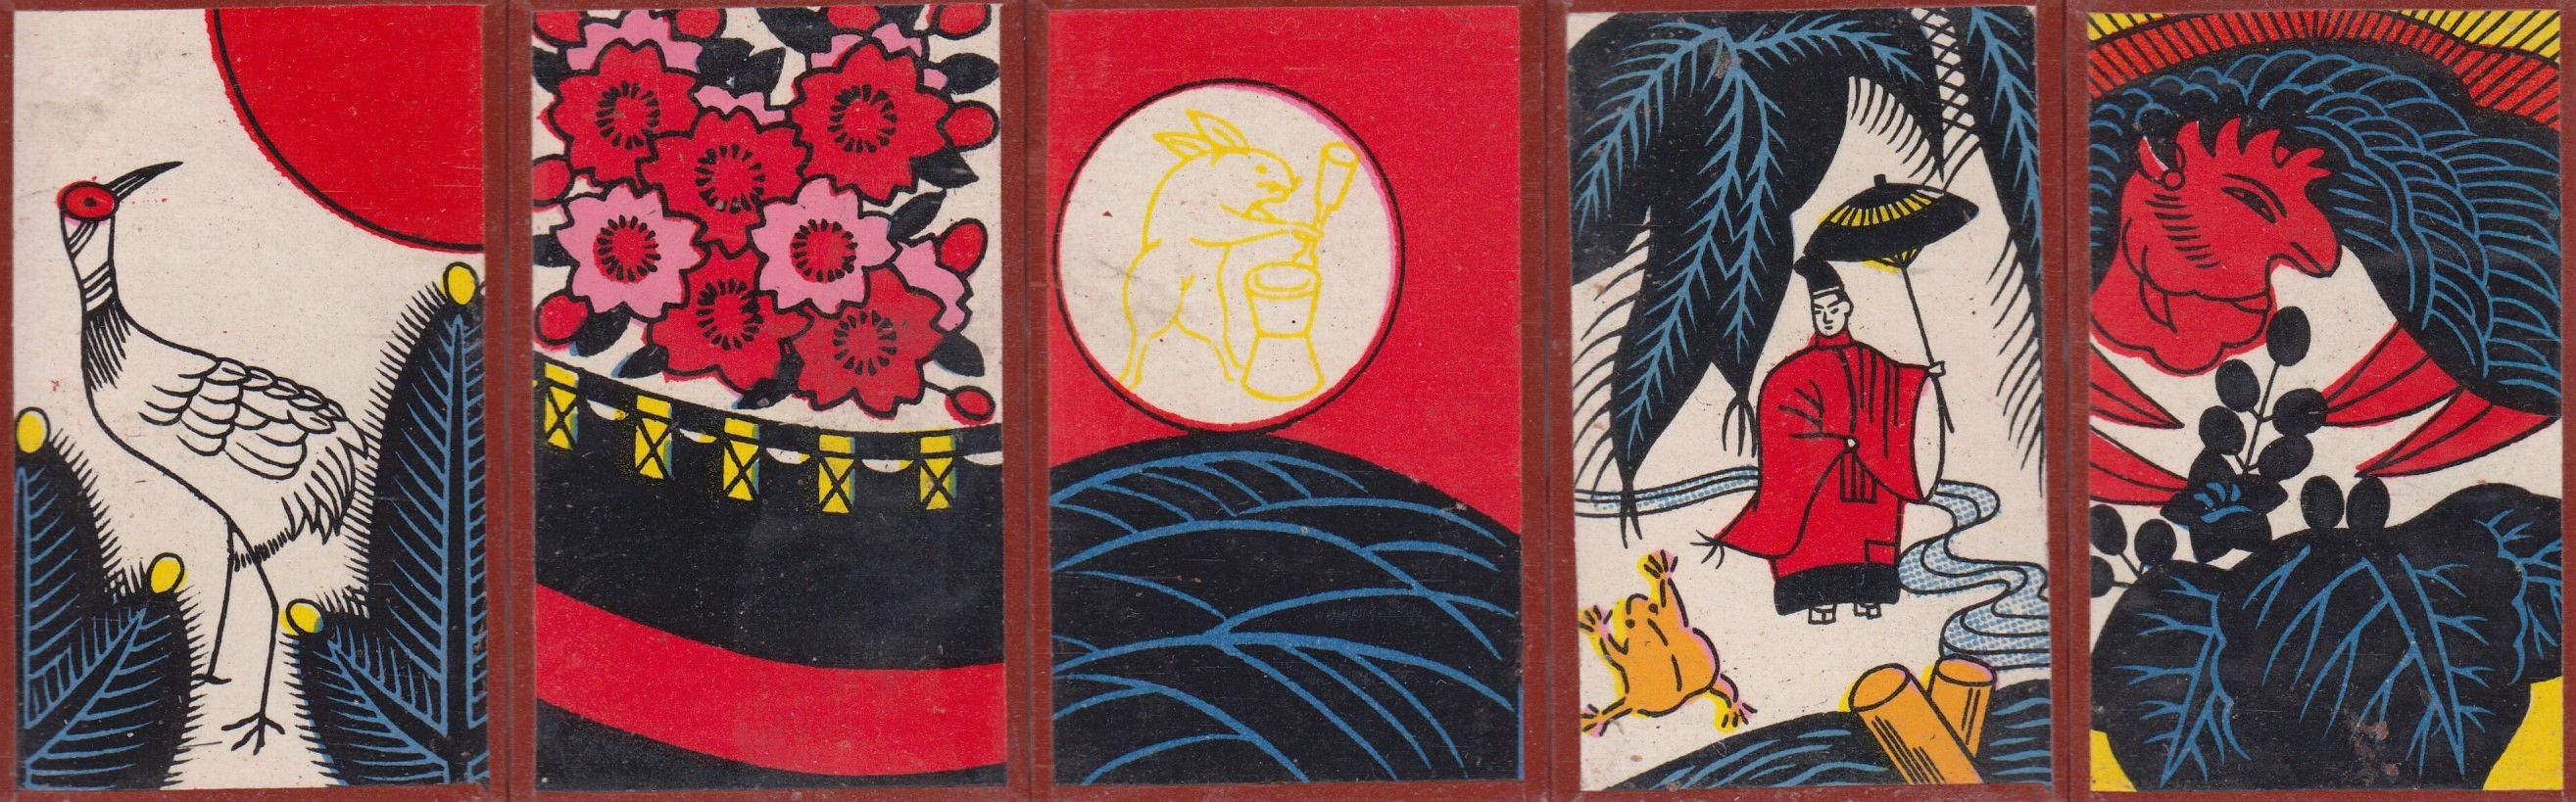 Five Hanafuda cards, which have thin blue lines showing detail in the black areas, unlike standard Hanafuda cards.